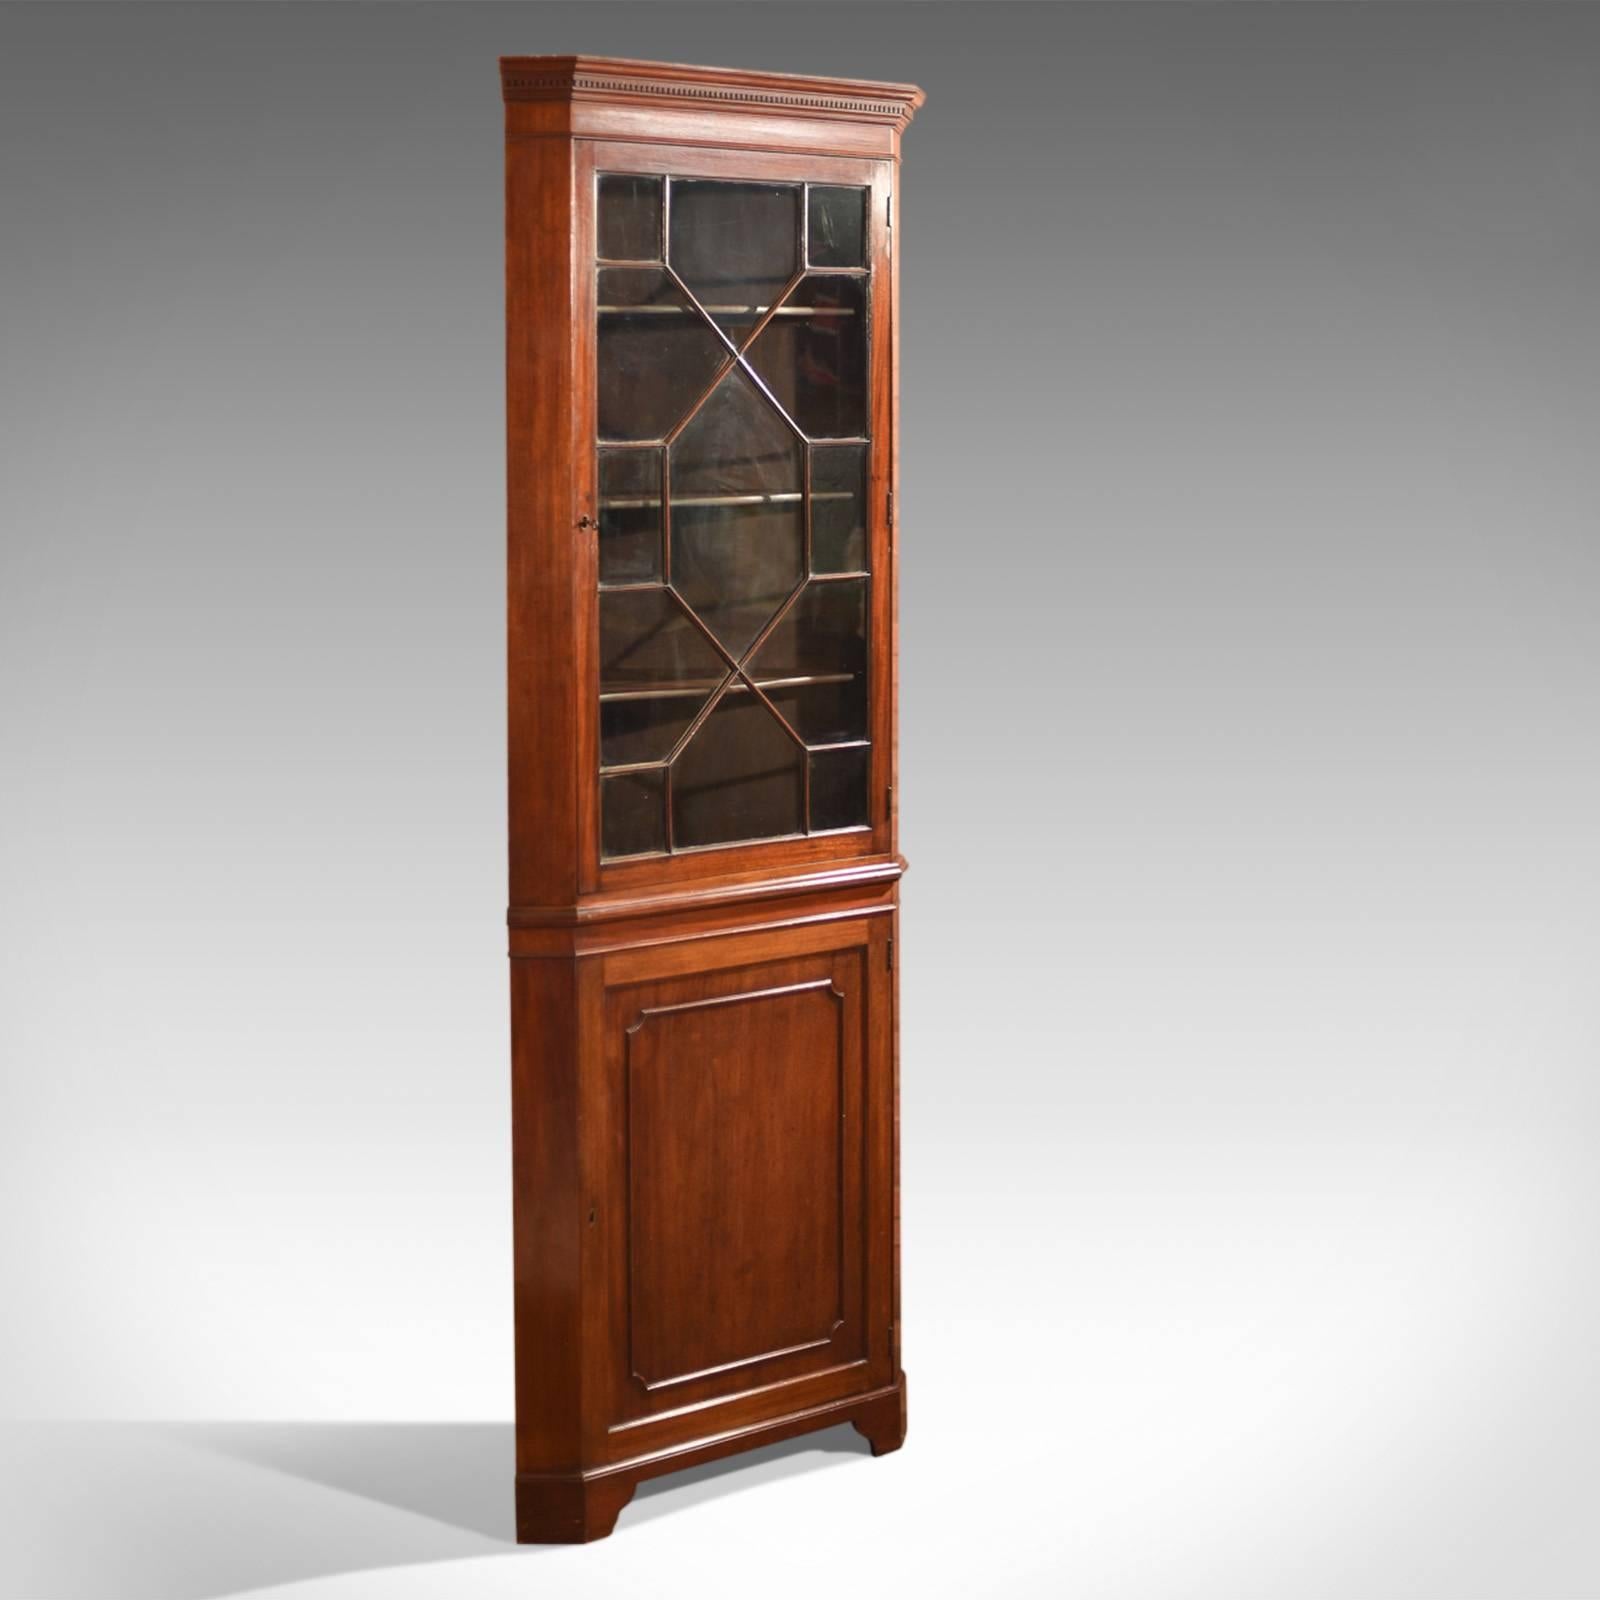 This is an antique, Edwardian glazed corner cabinet dating, circa 1910.

Beautifully made in a Georgian revival style, this example is taller than most at 223cm (87.75